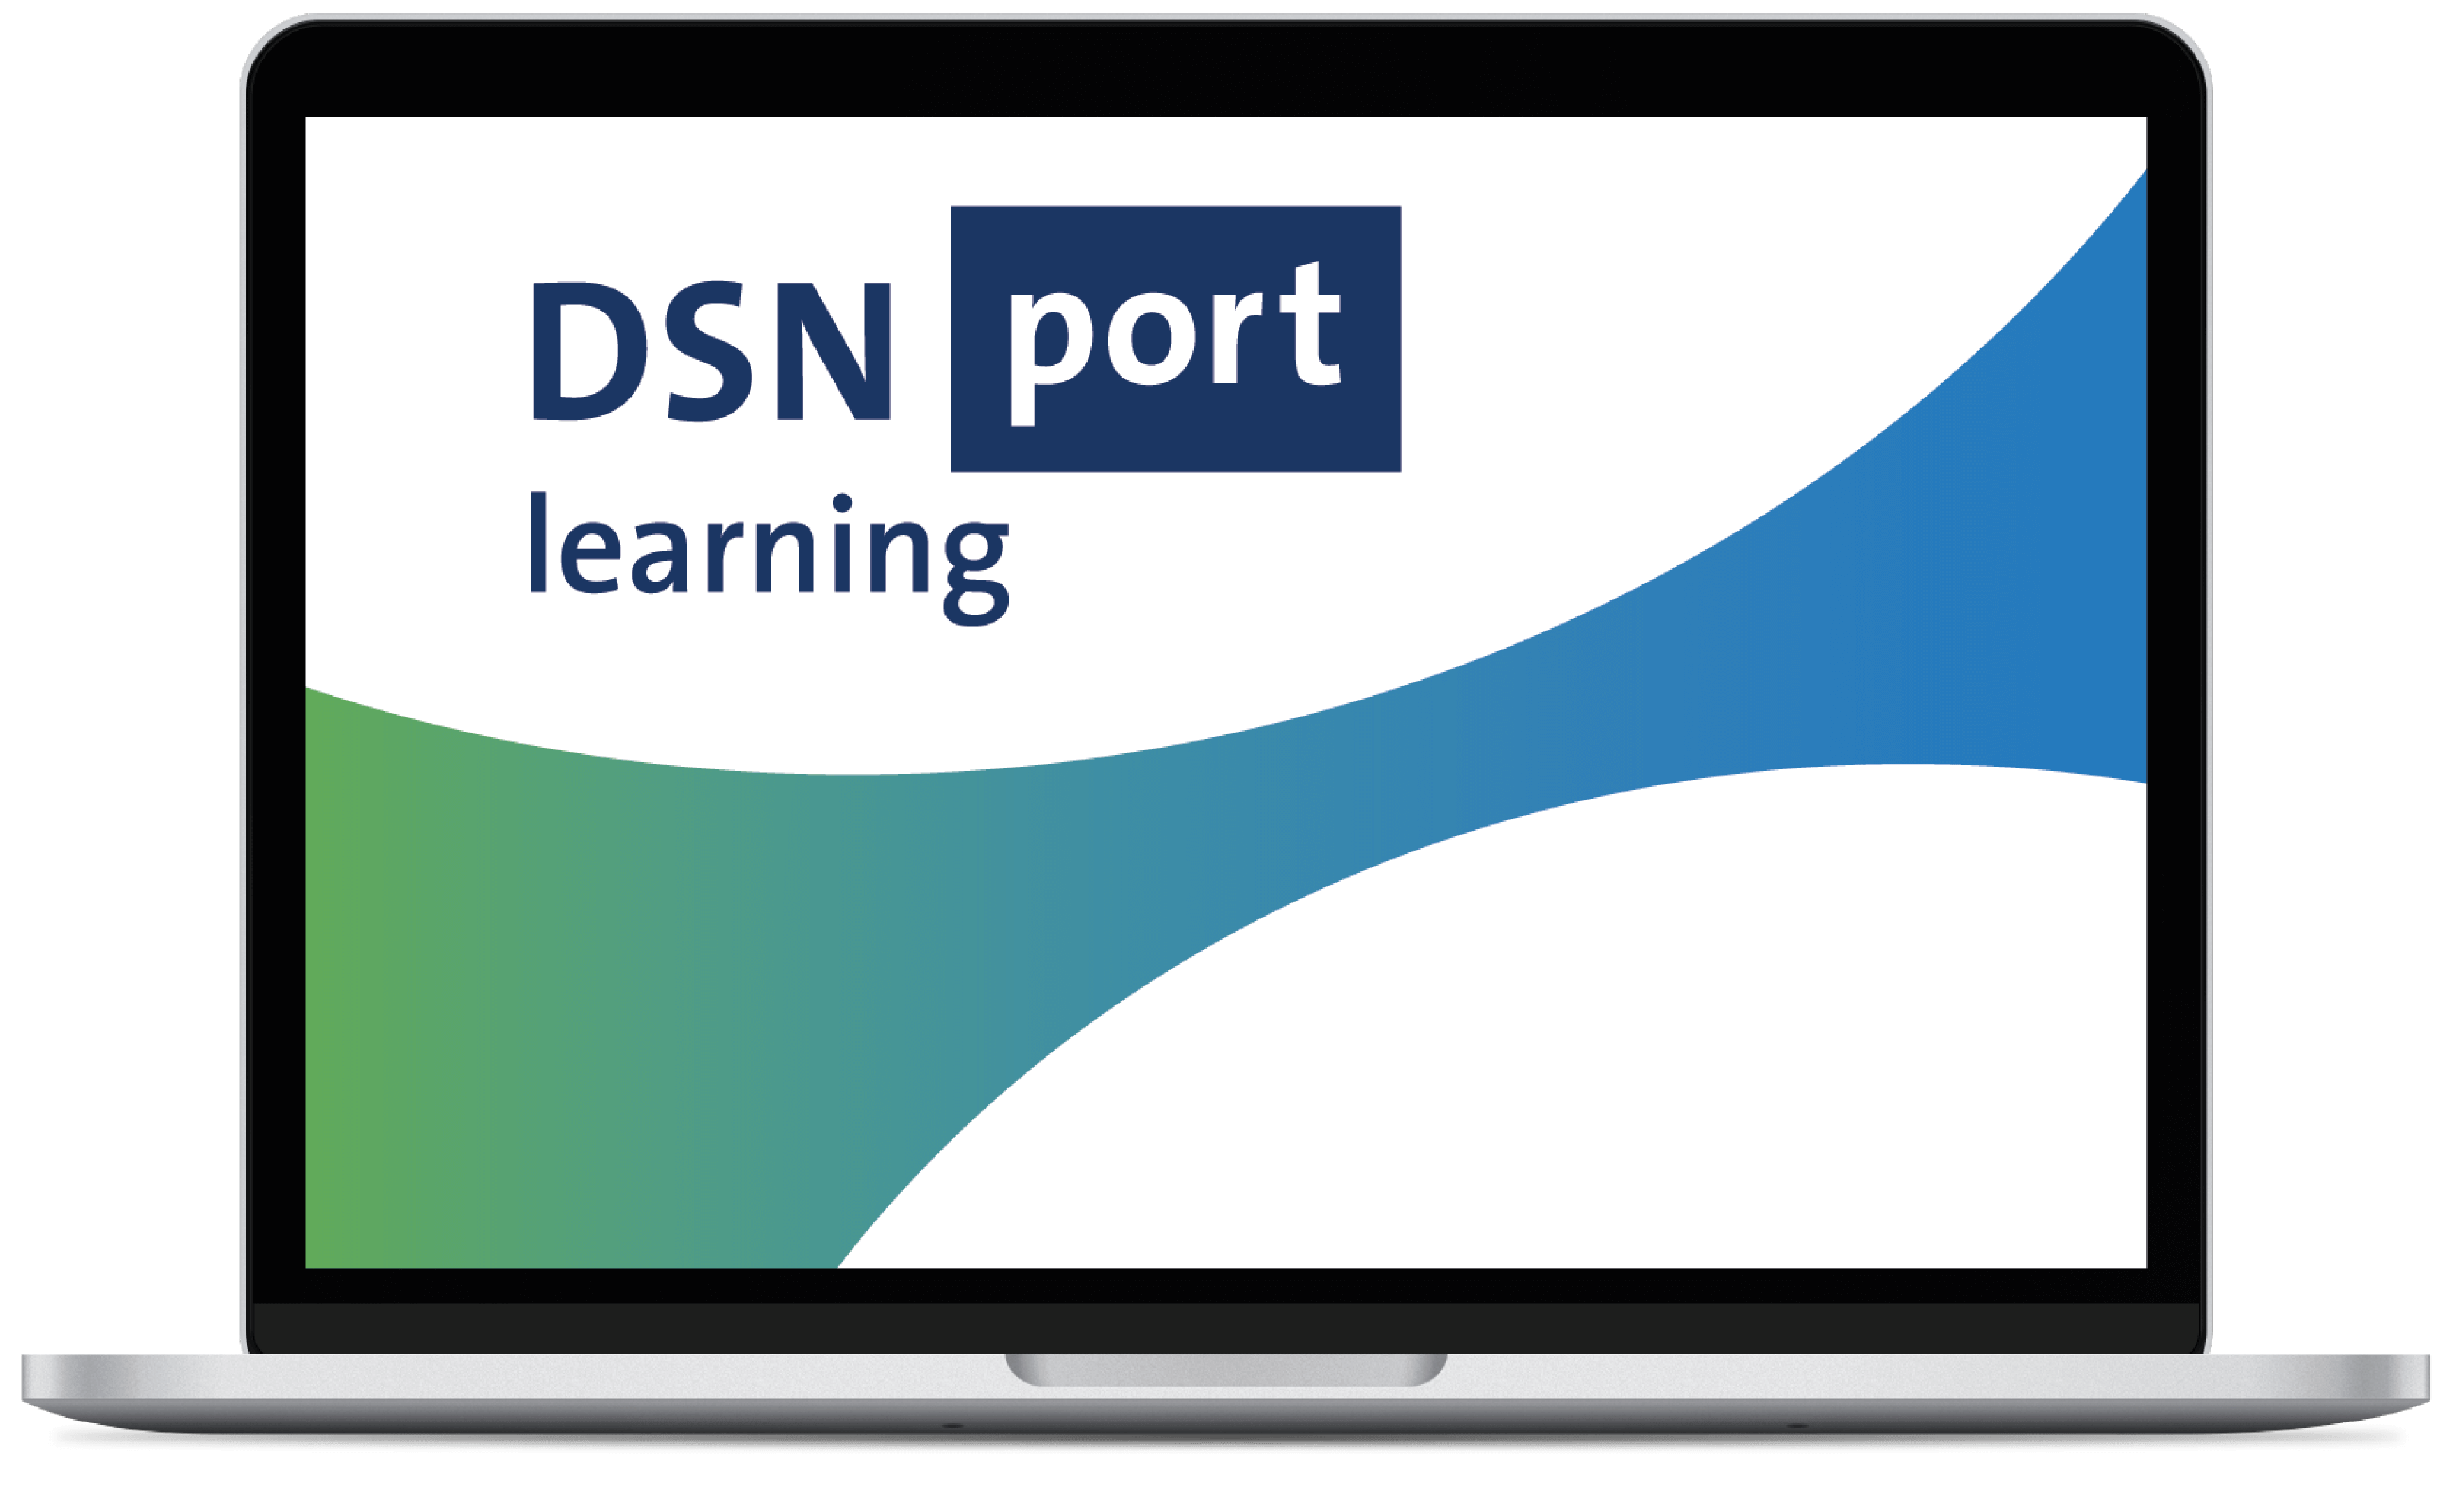 Laptop displaying the inscription DSN port learning.